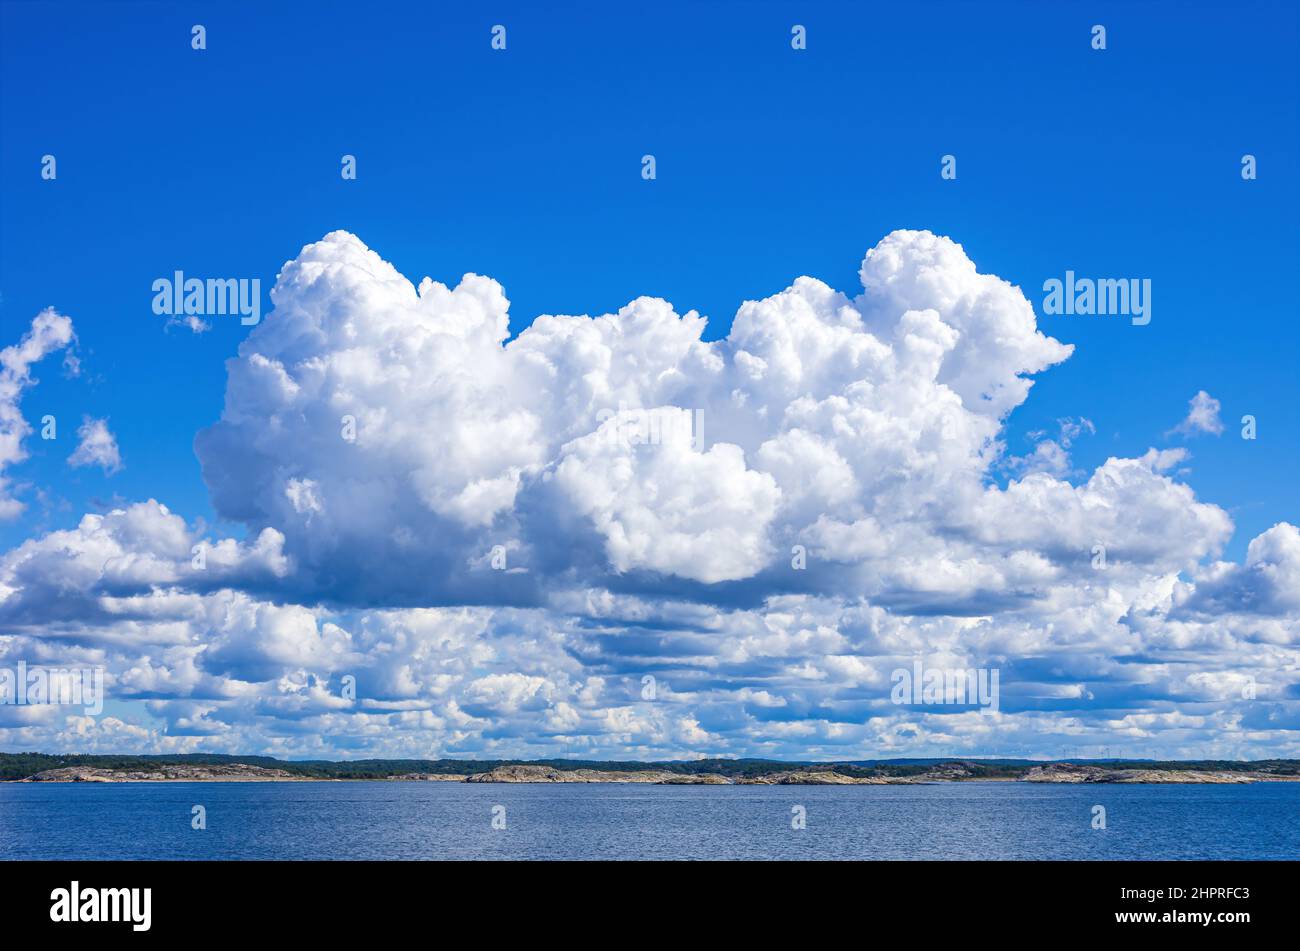 Skerries and coastline under a bright cloudy blue sky in the Koster fjord between the Koster islands and Strömstad, Bohuslän, Sweden. Stock Photo